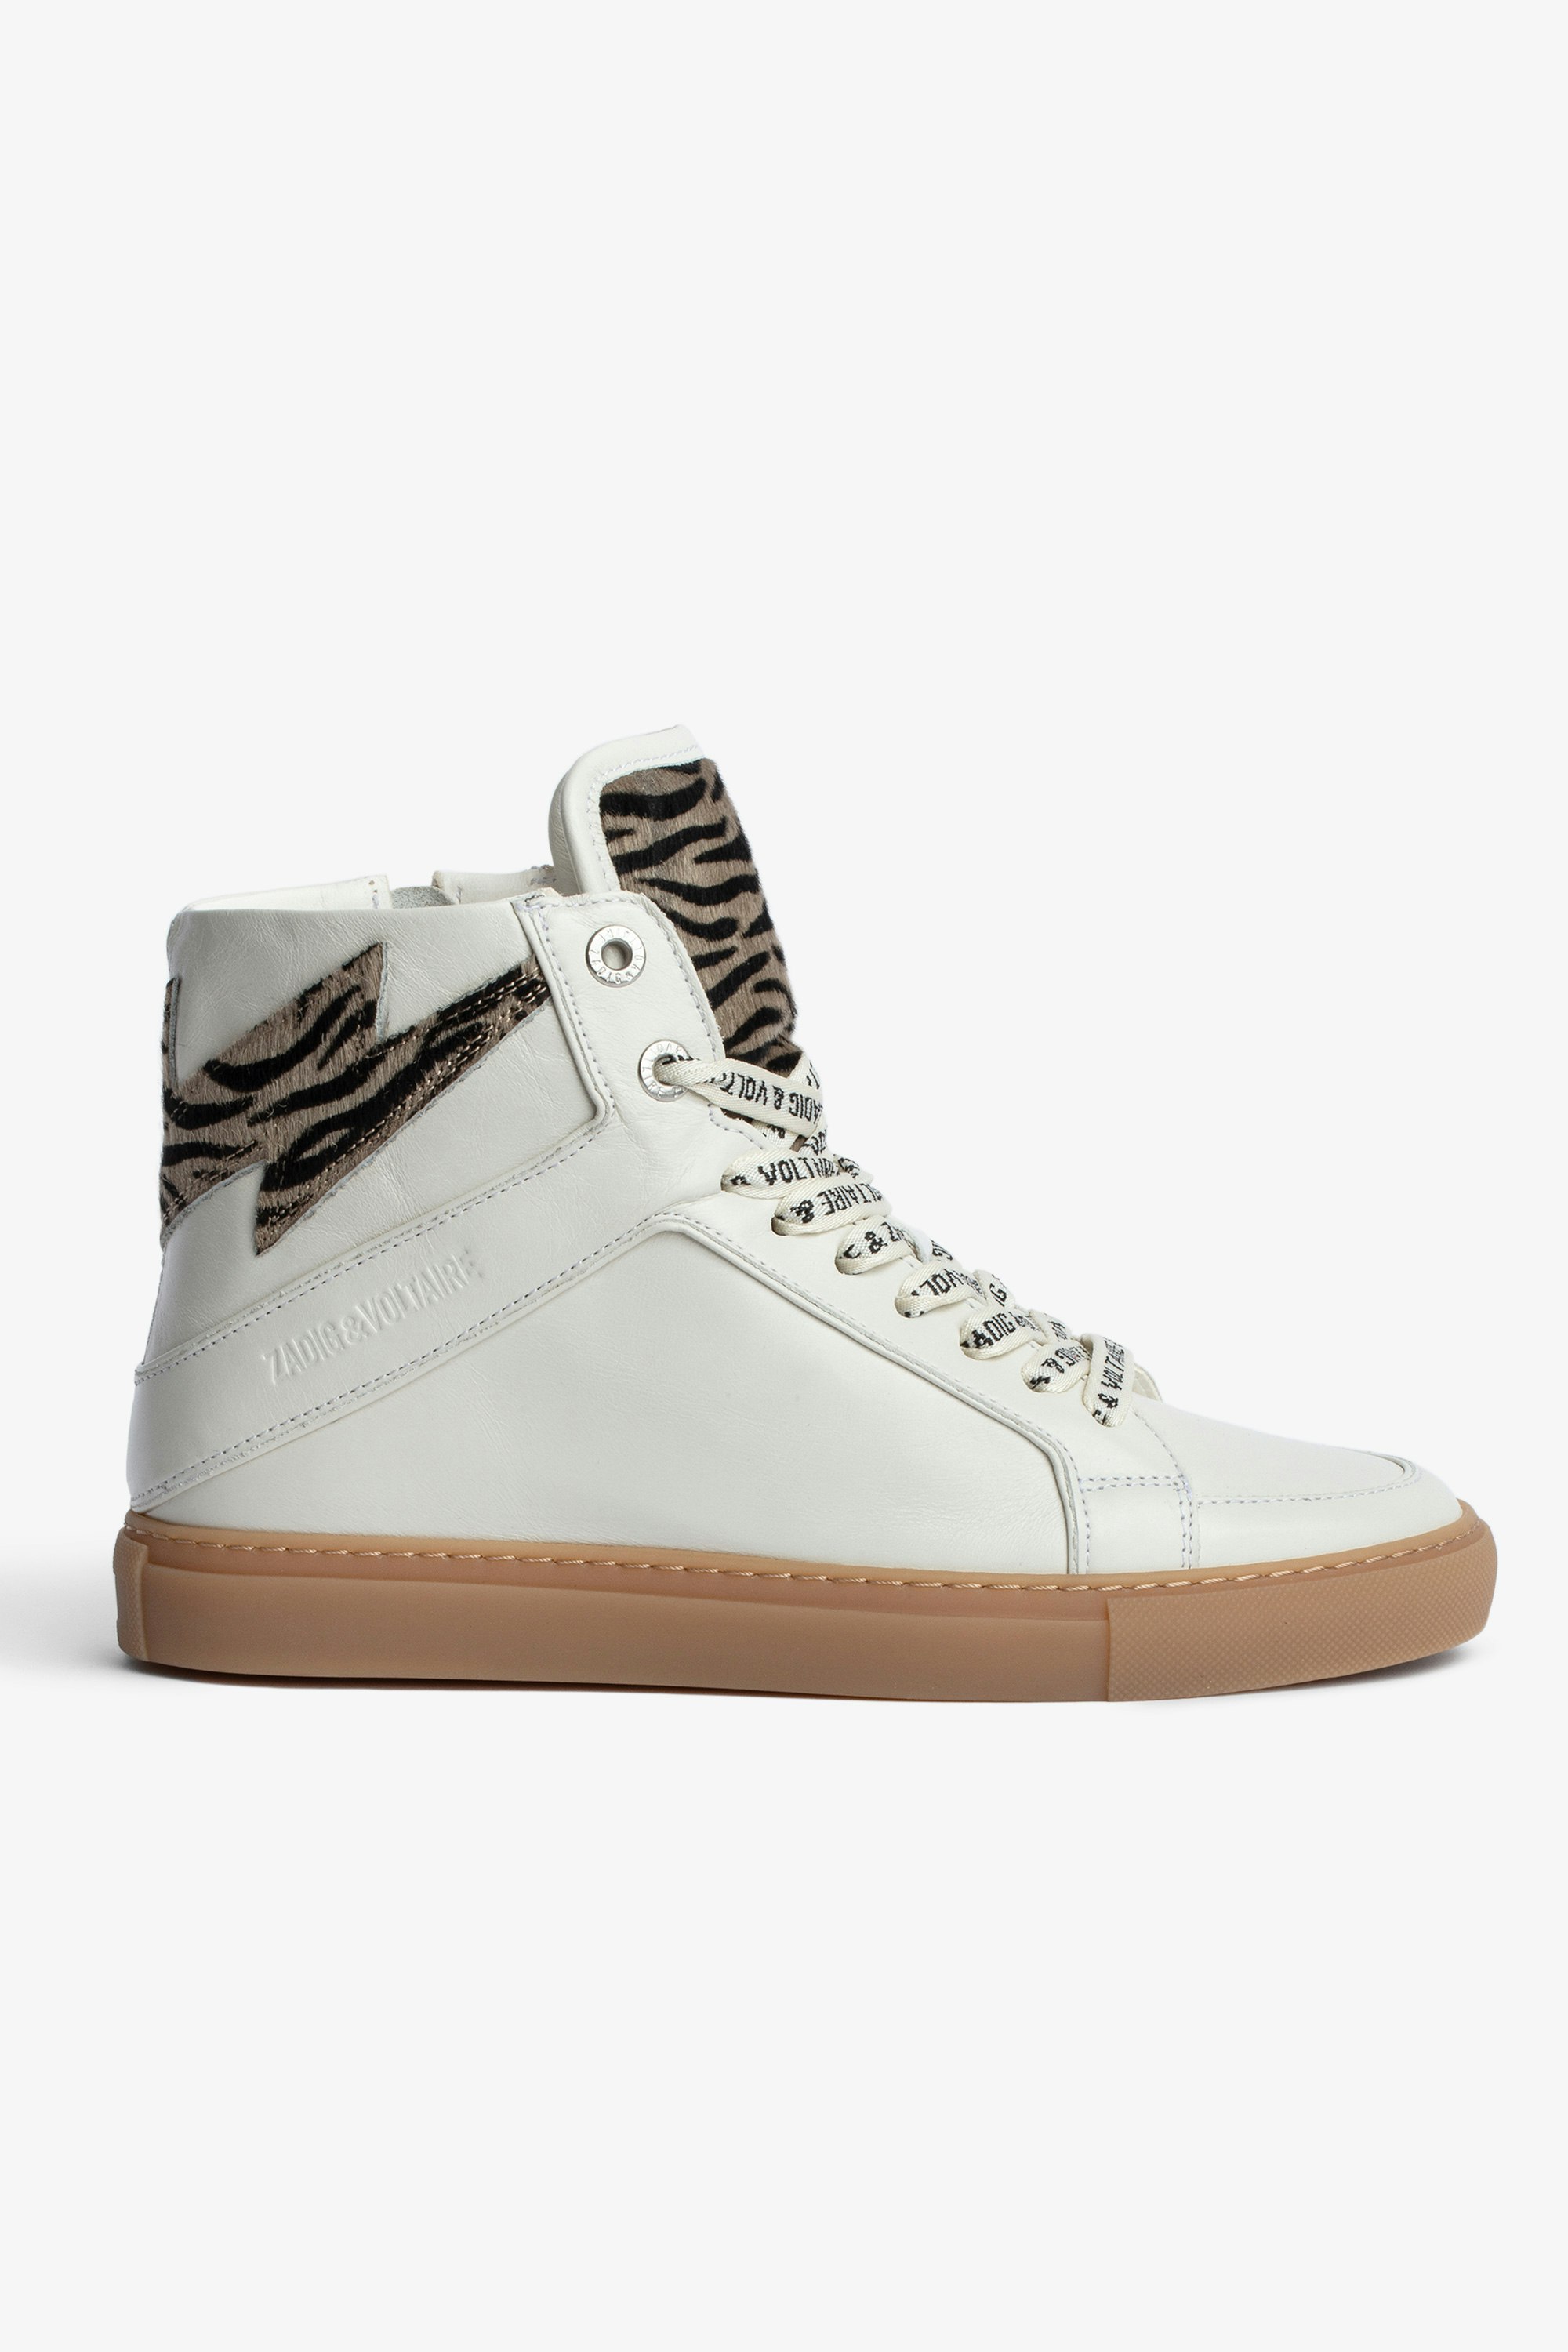 ZV1747 High Flash Sneakers Women’s white leather high-top sneakers with zebra-print panels